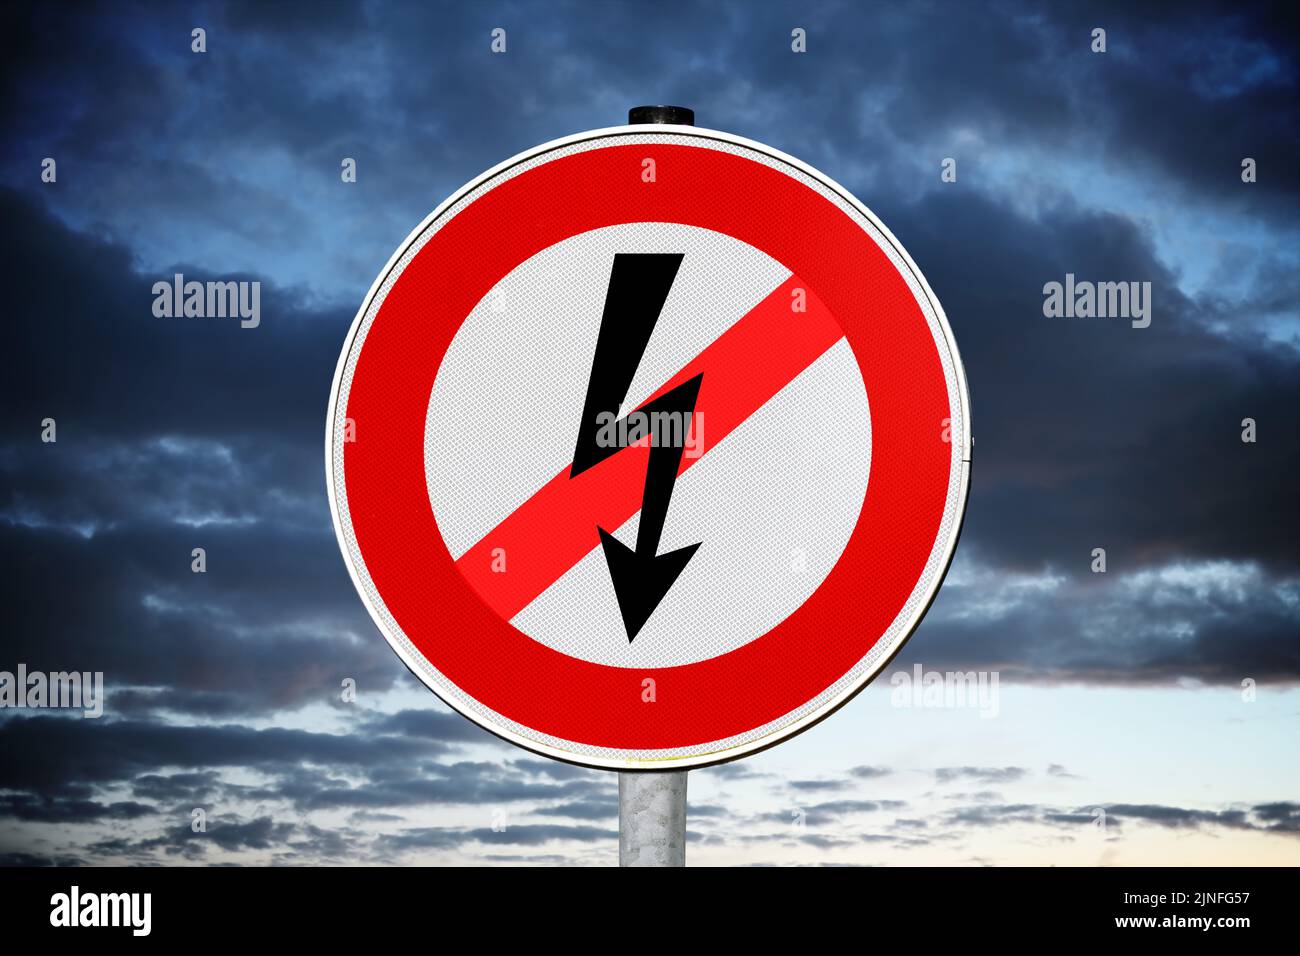 Sign With Crossed Out Electricity Arrow, Symbol Photo Energy Shortage And Energy Saving Stock Photo